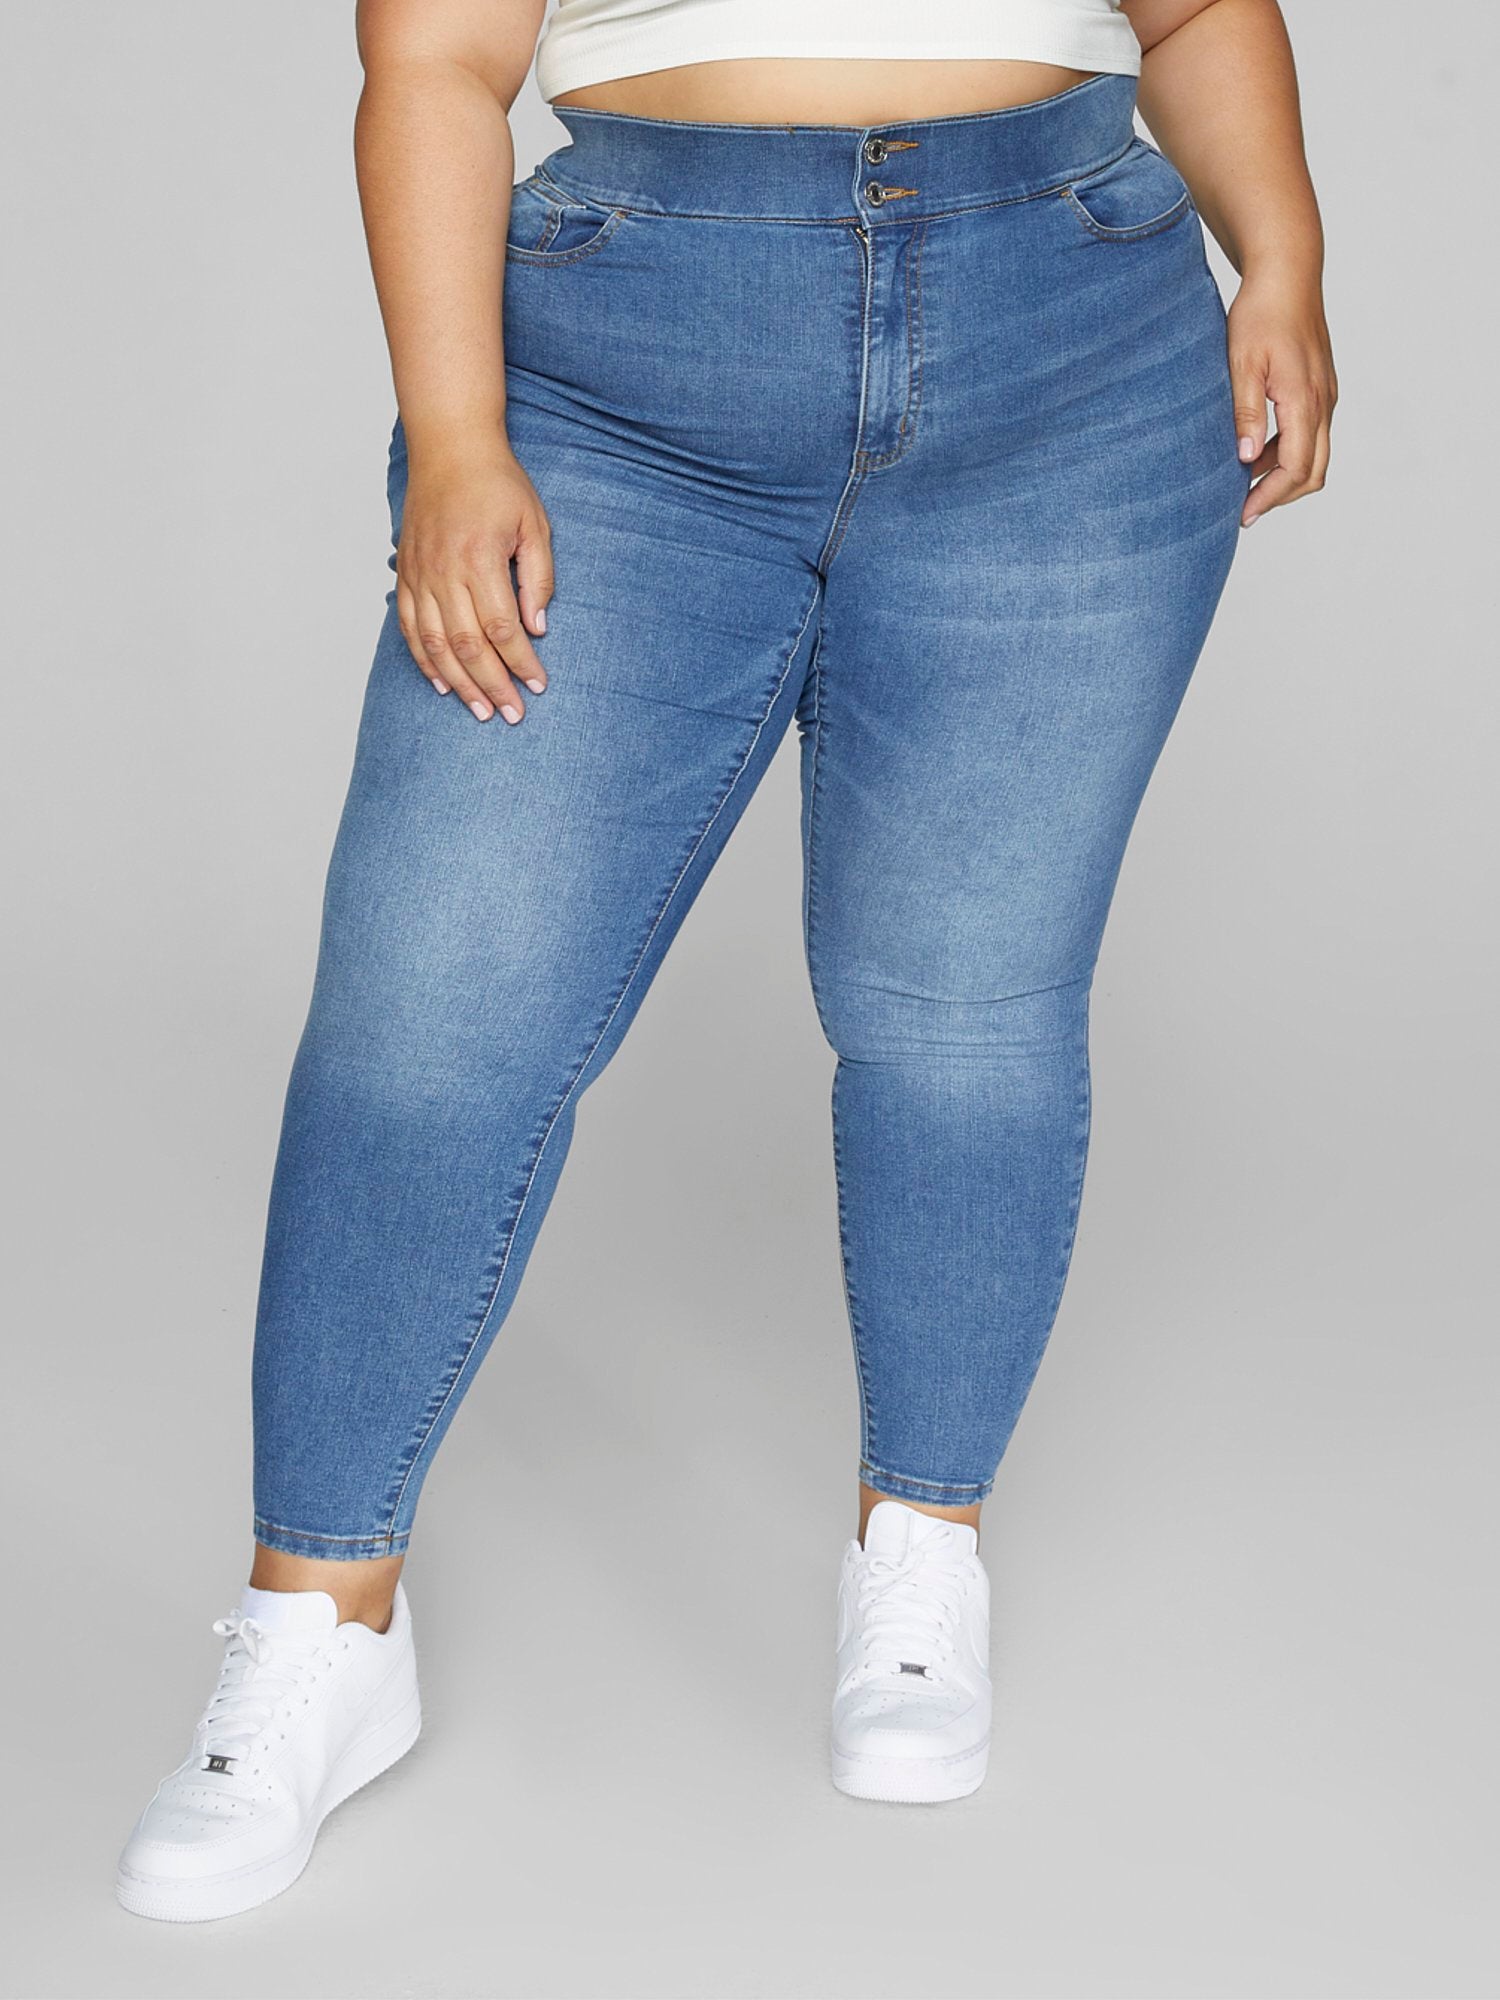 Plus Size The Limitless Jegging in Med Blue Wash | Fashion to Figure